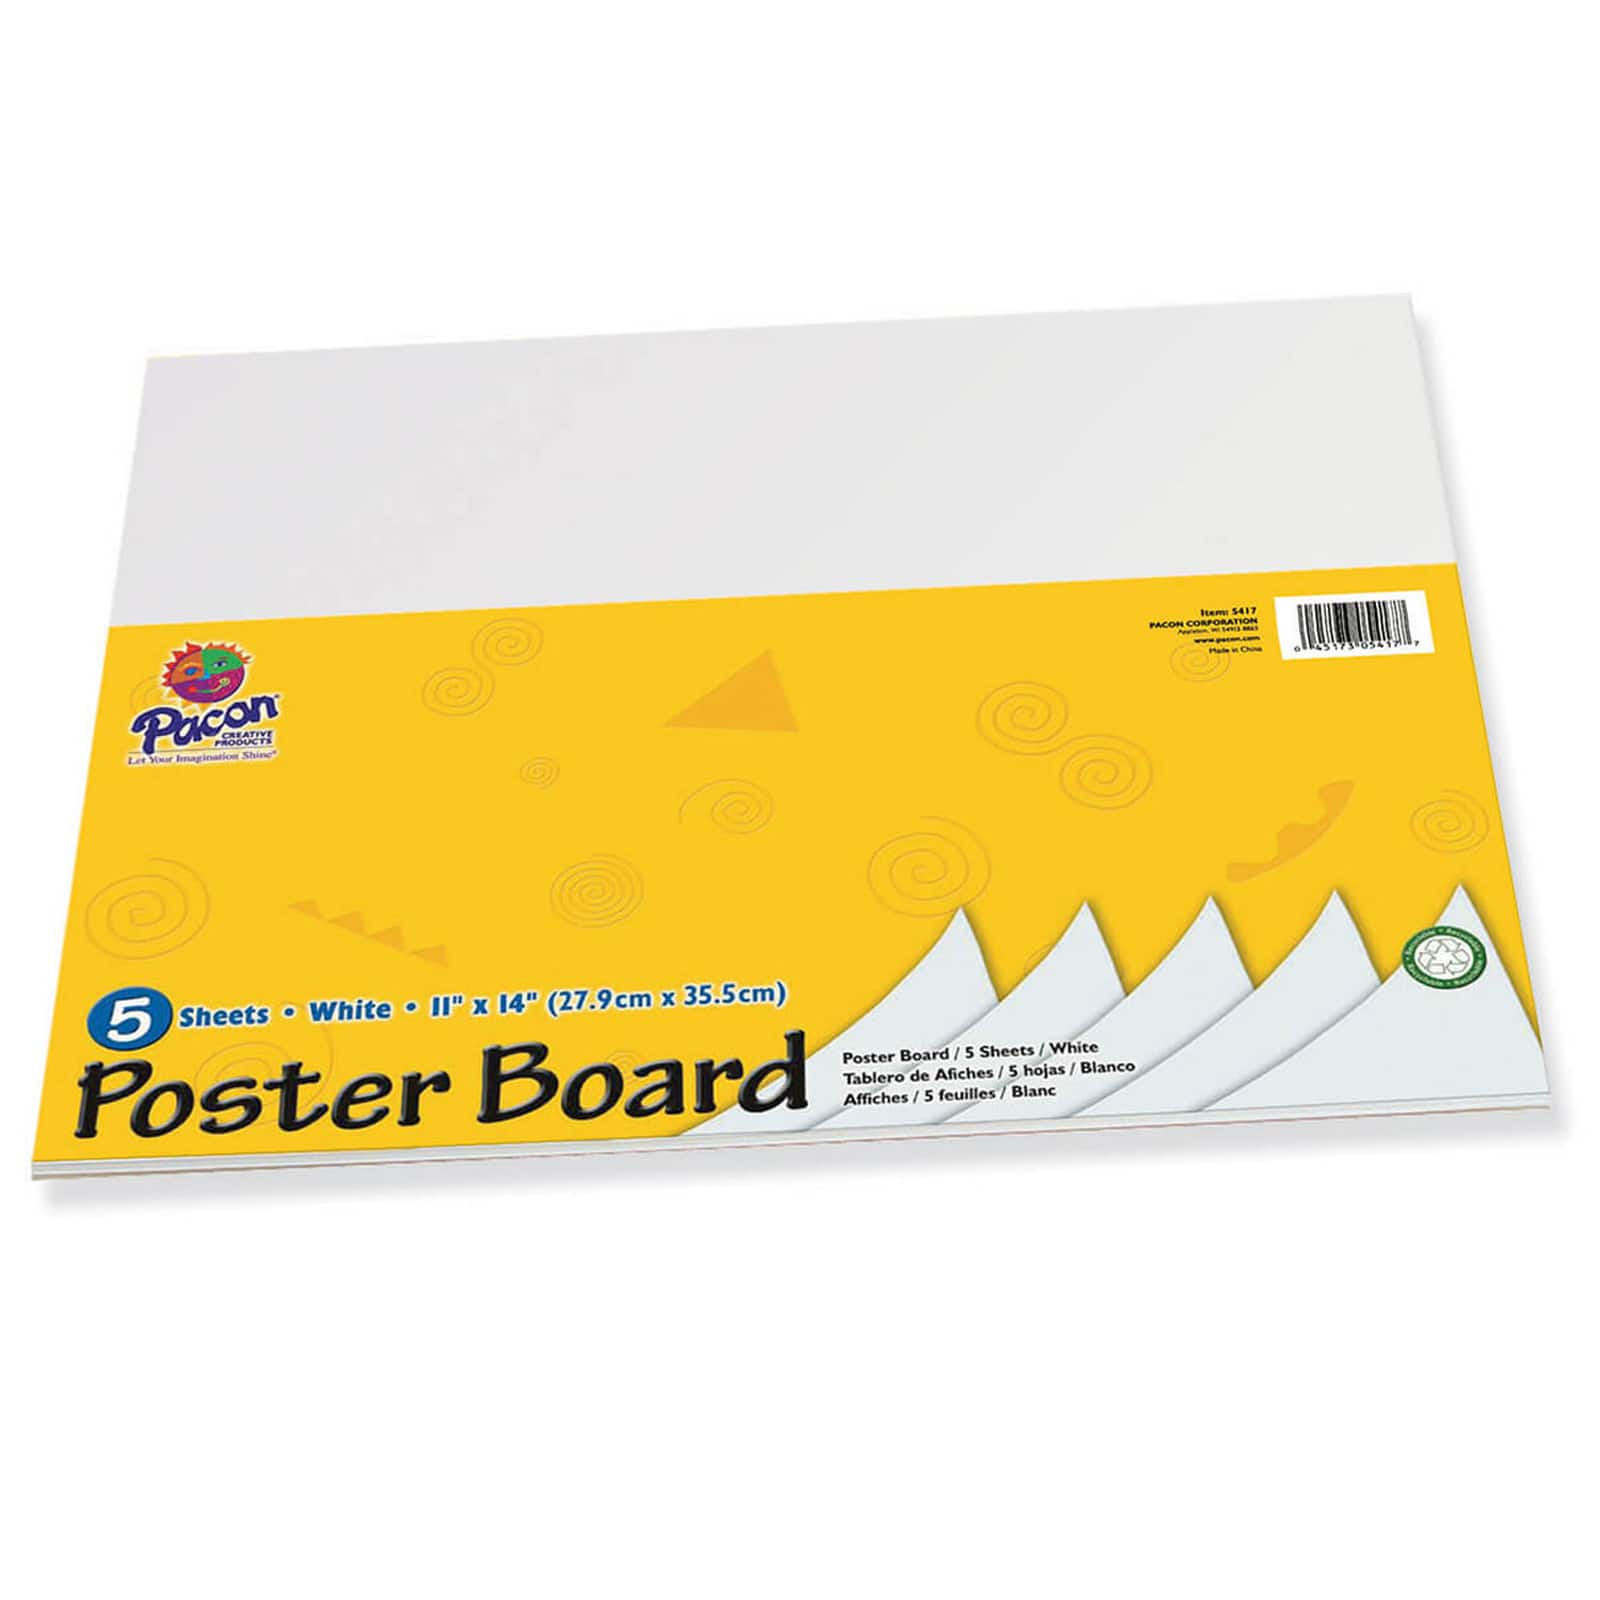 NEW Pkg 4 JOT POSTER BOARD SHEETS 11X14 WHITE School Home Office Craft a